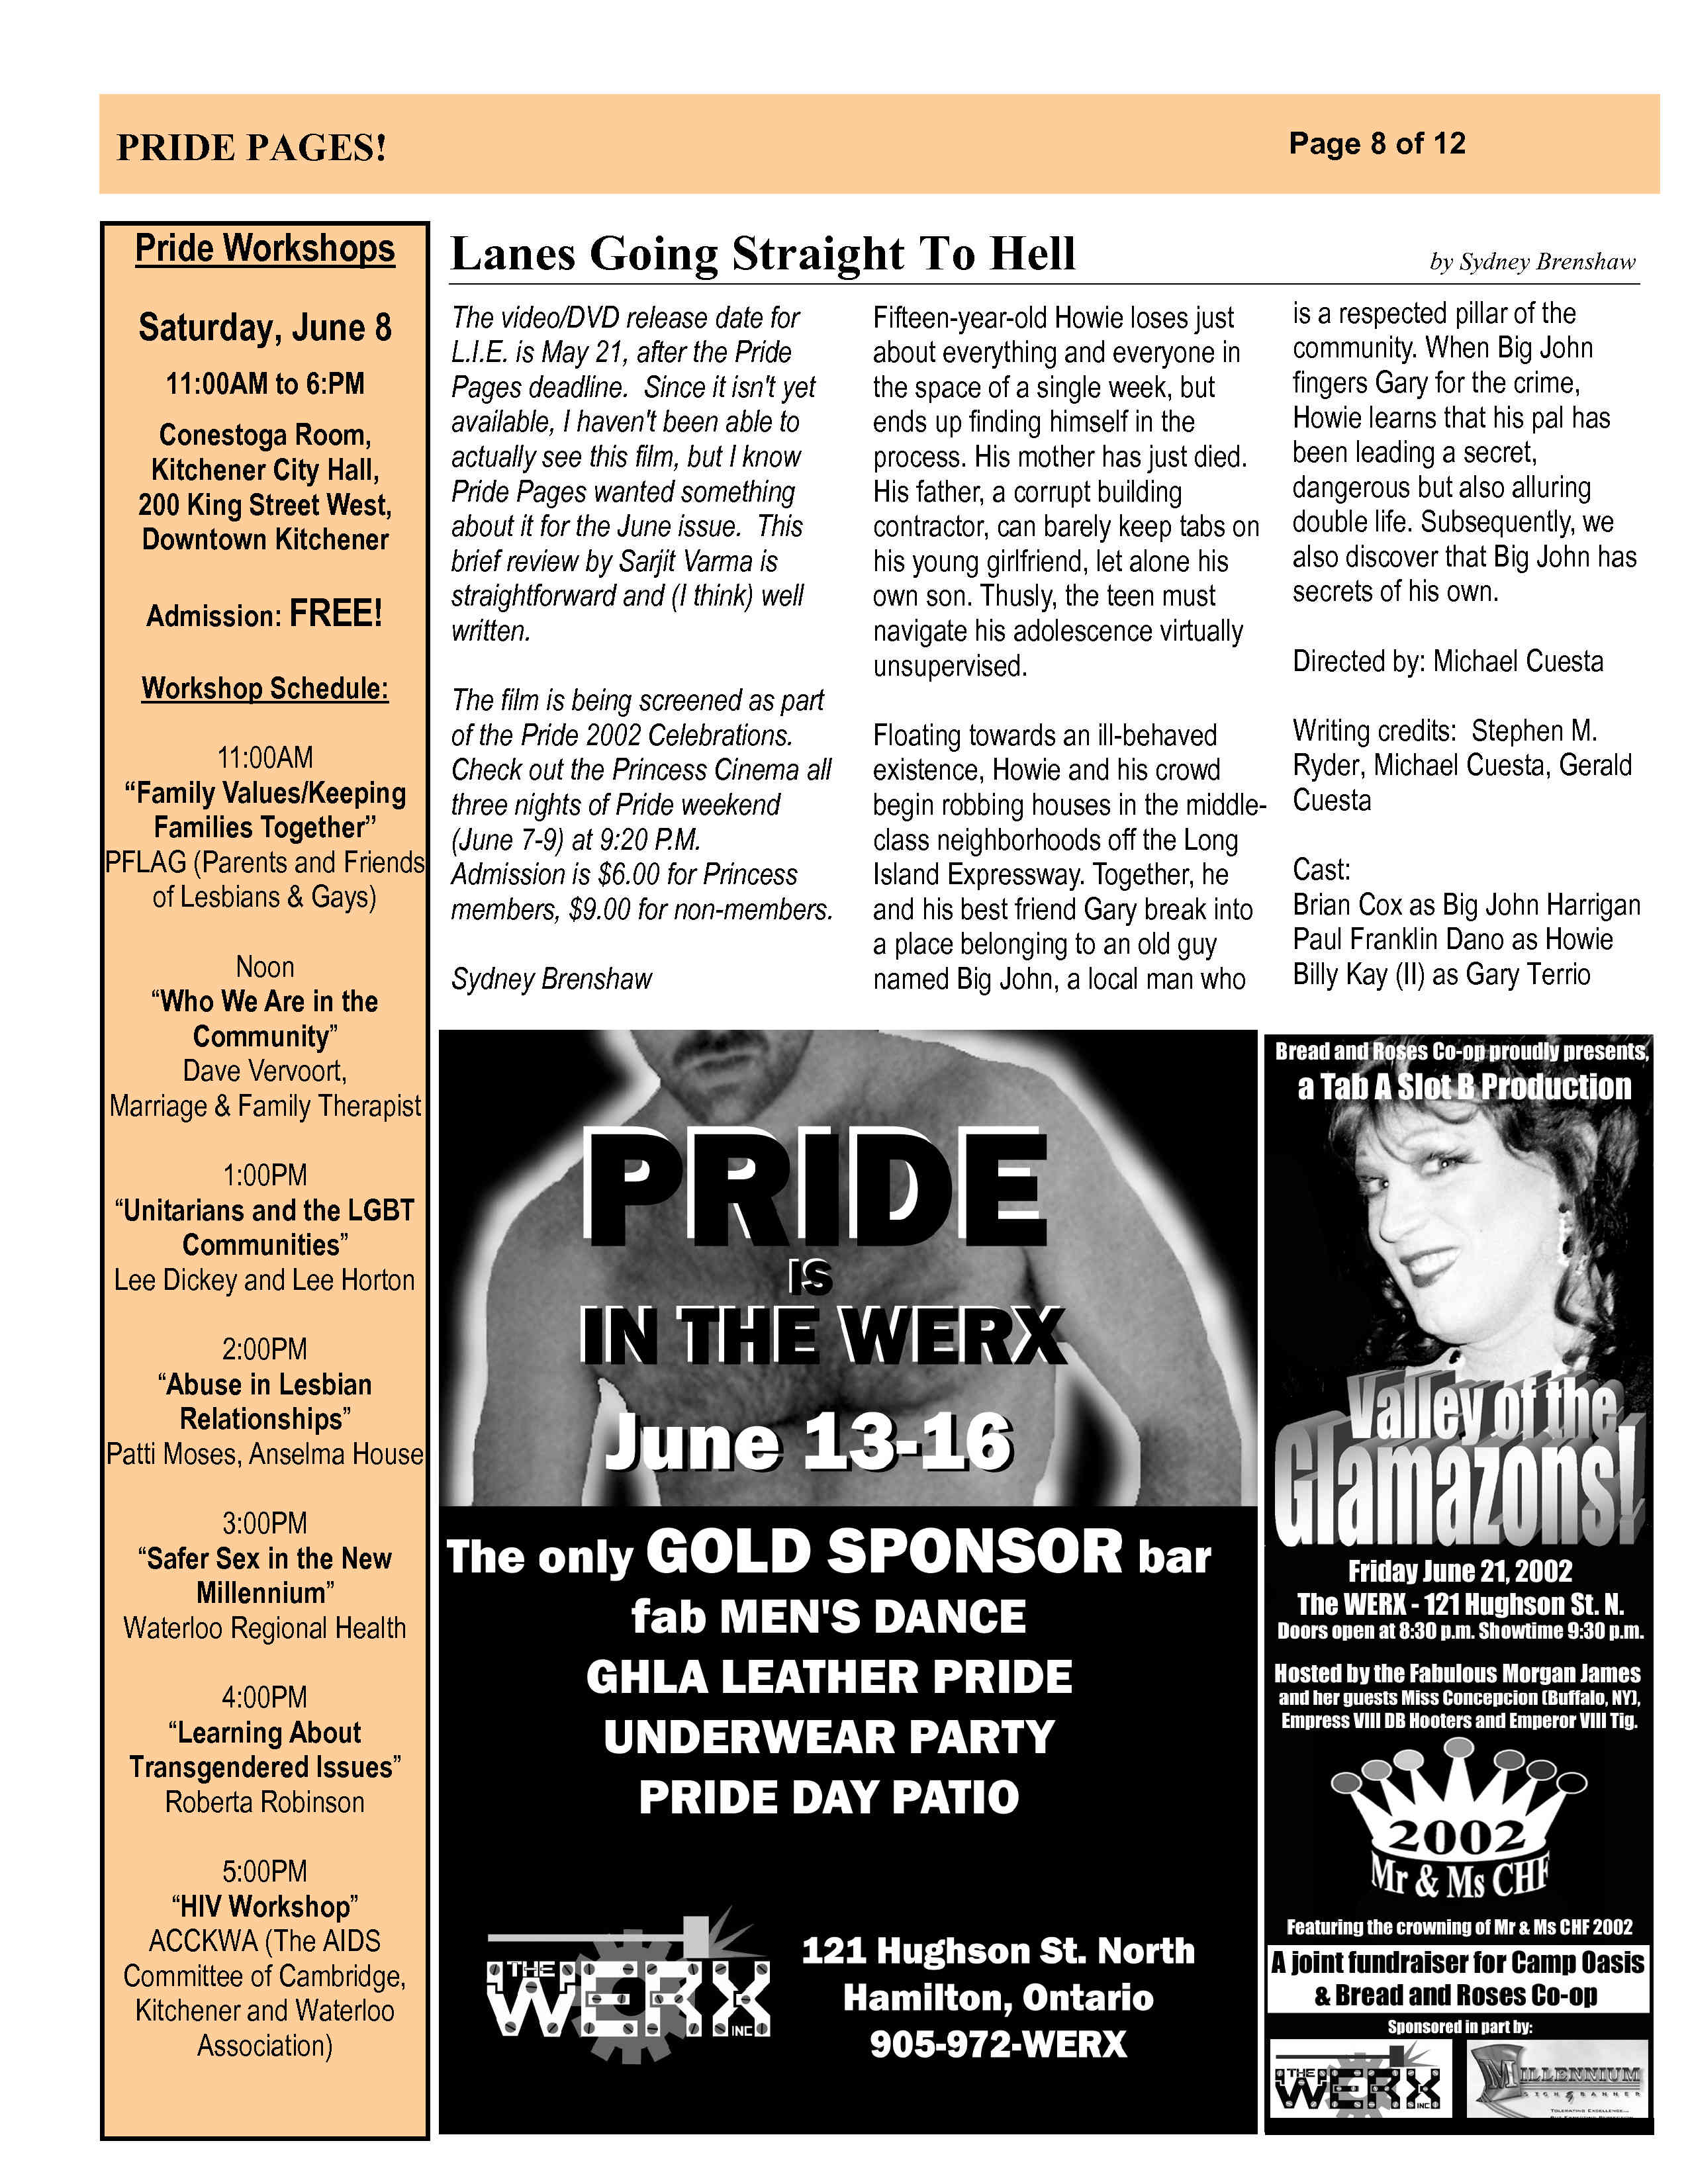 Pride Pages 2002-06 p8